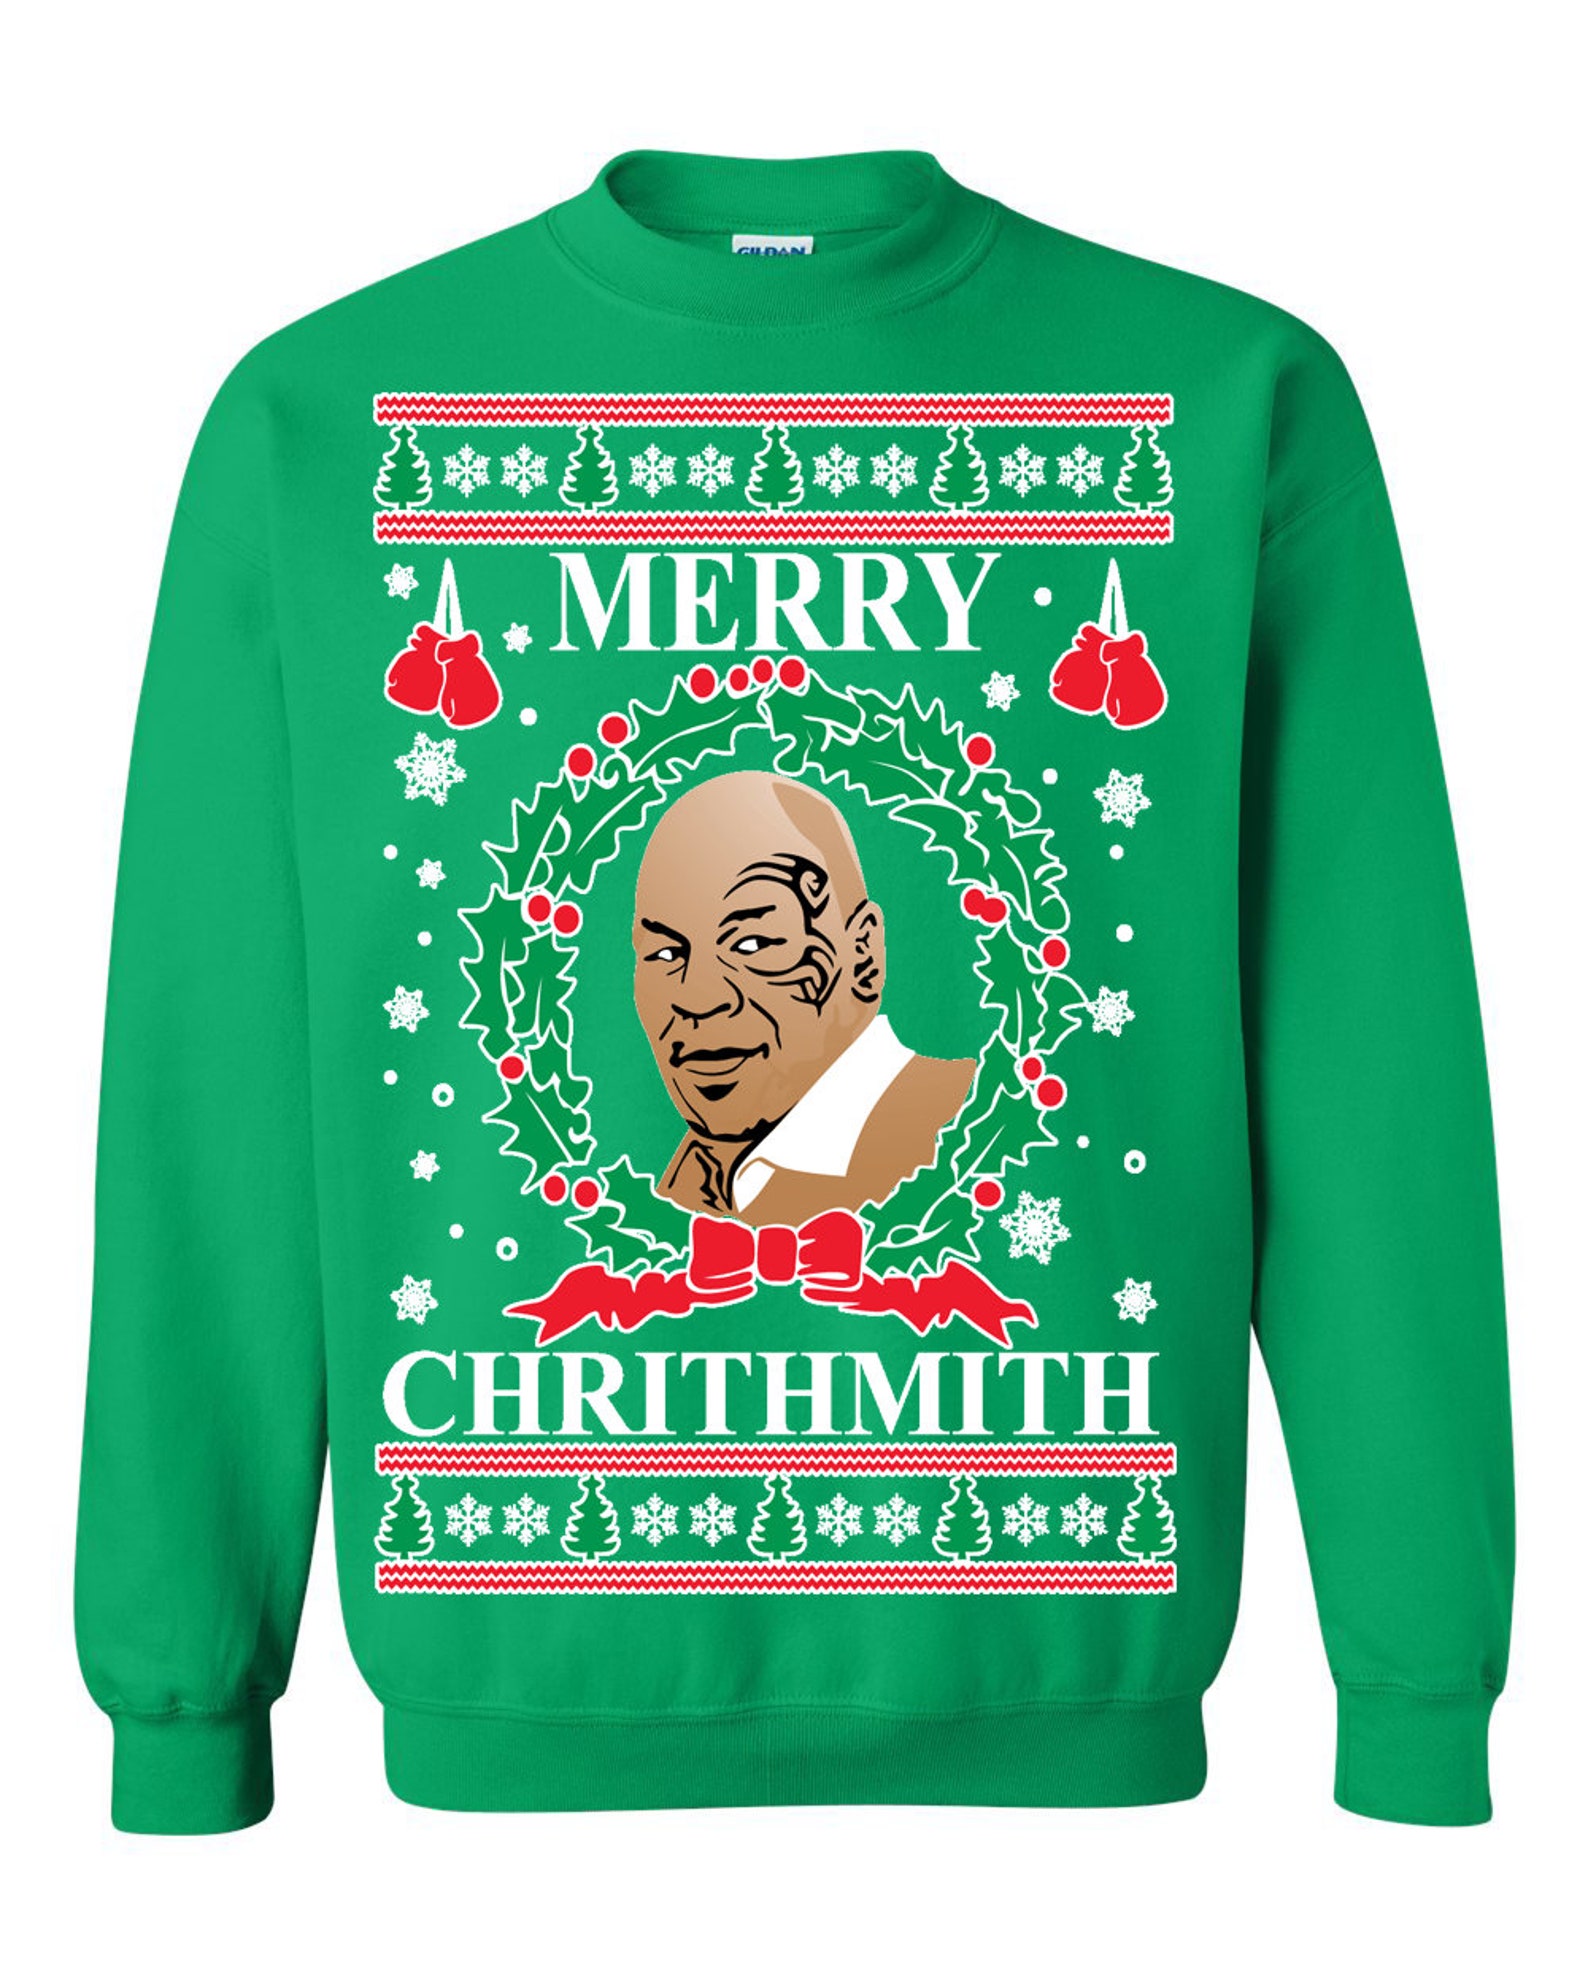 Oncoast Mike Tyson Merry Chrithmith Ugly Christmas Sweater - Etsy